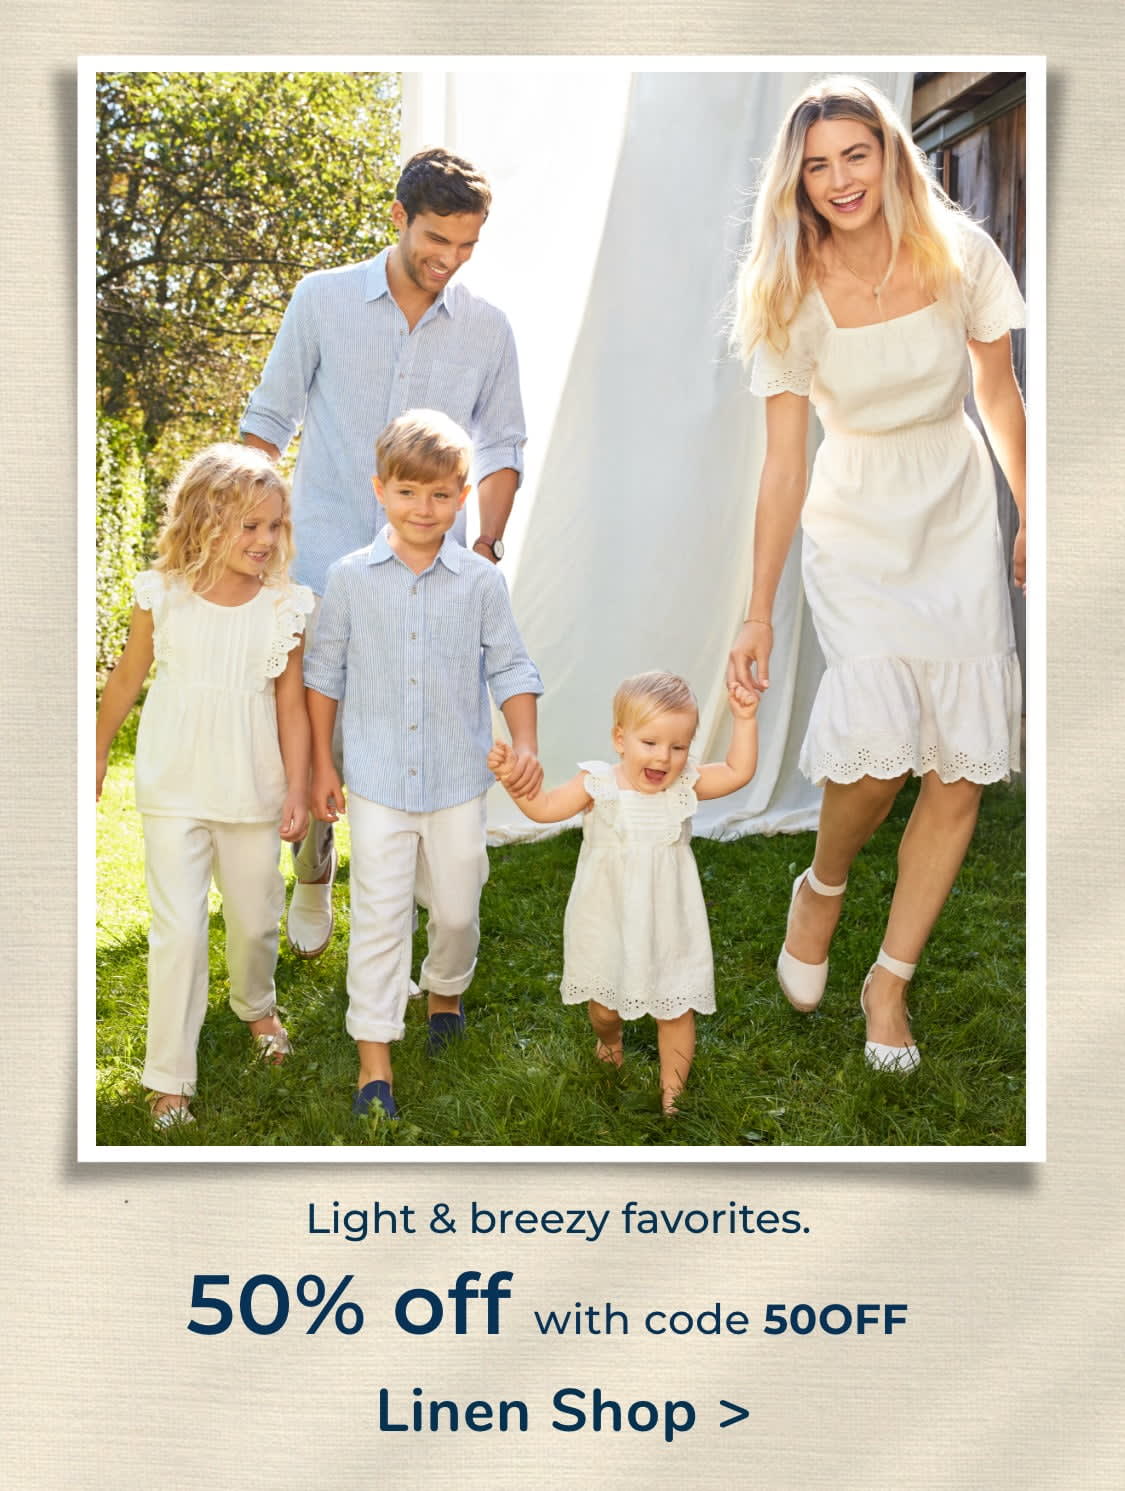 Linen Shop 50% off with code 50OFF